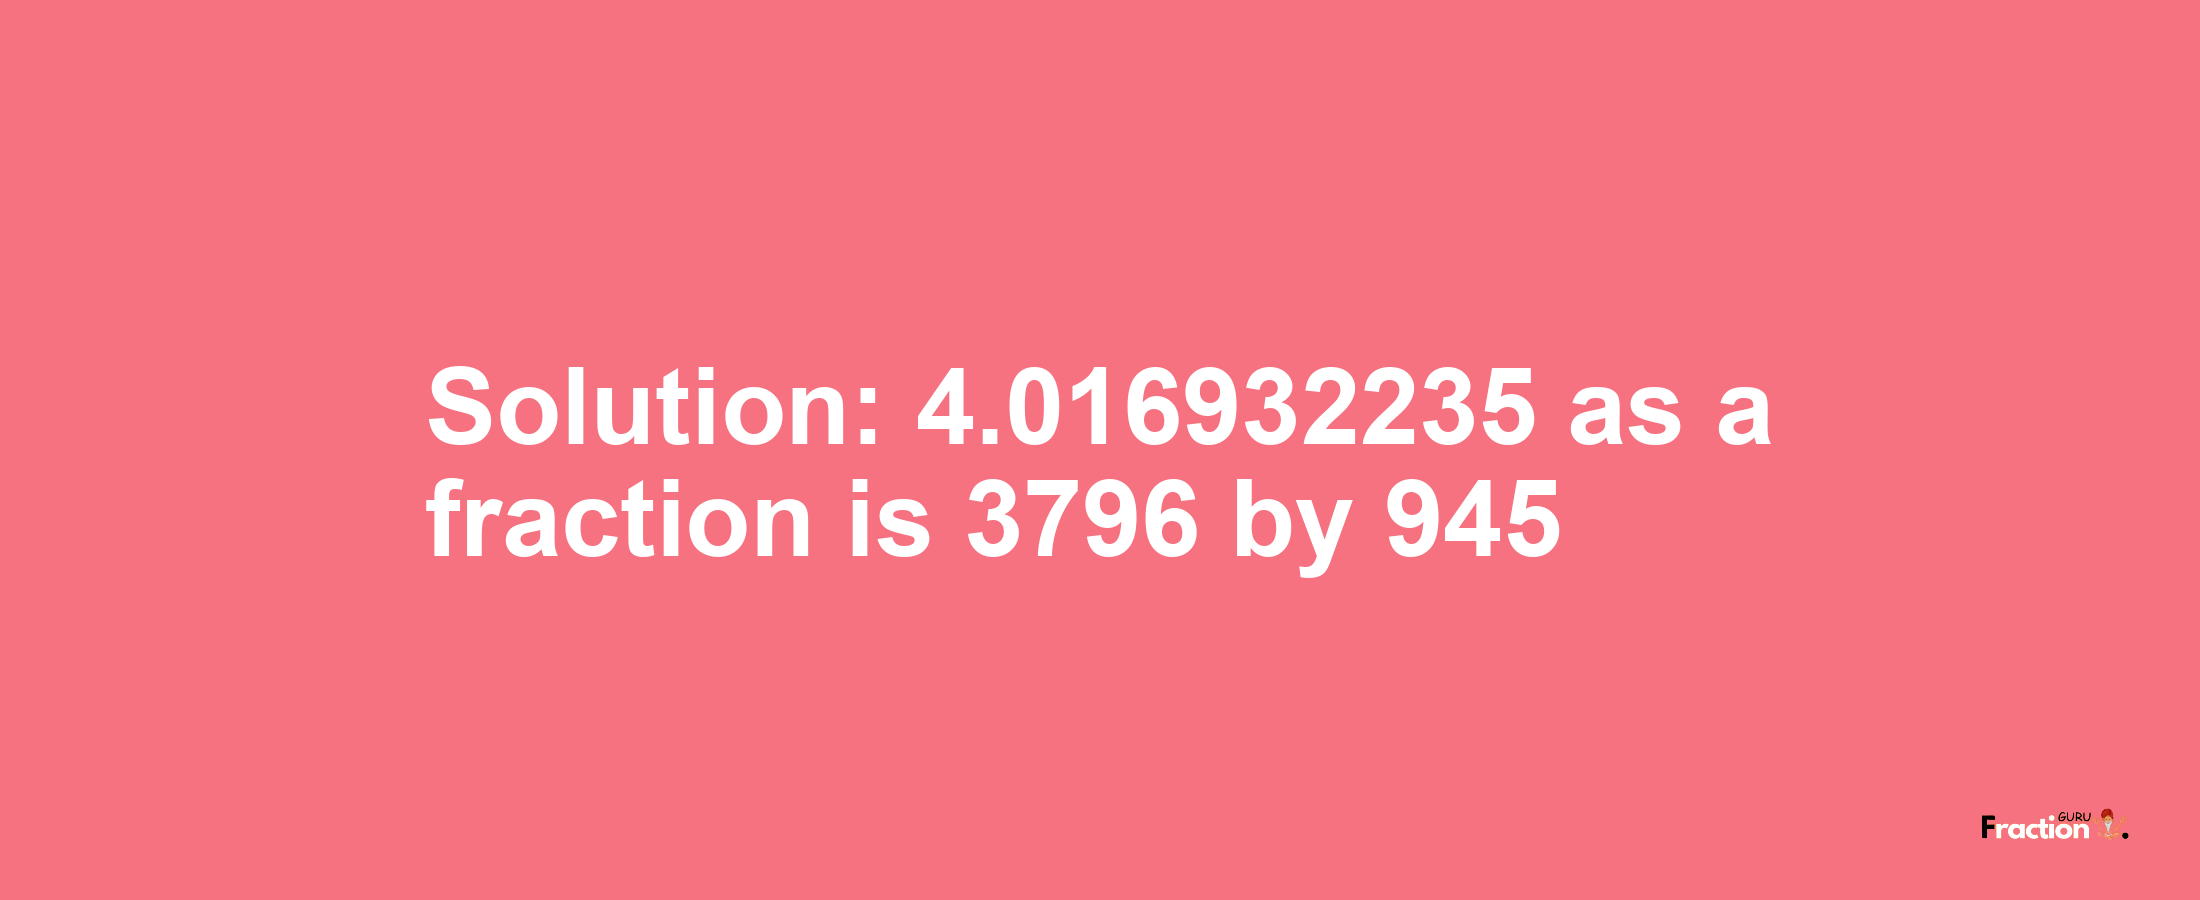 Solution:4.016932235 as a fraction is 3796/945